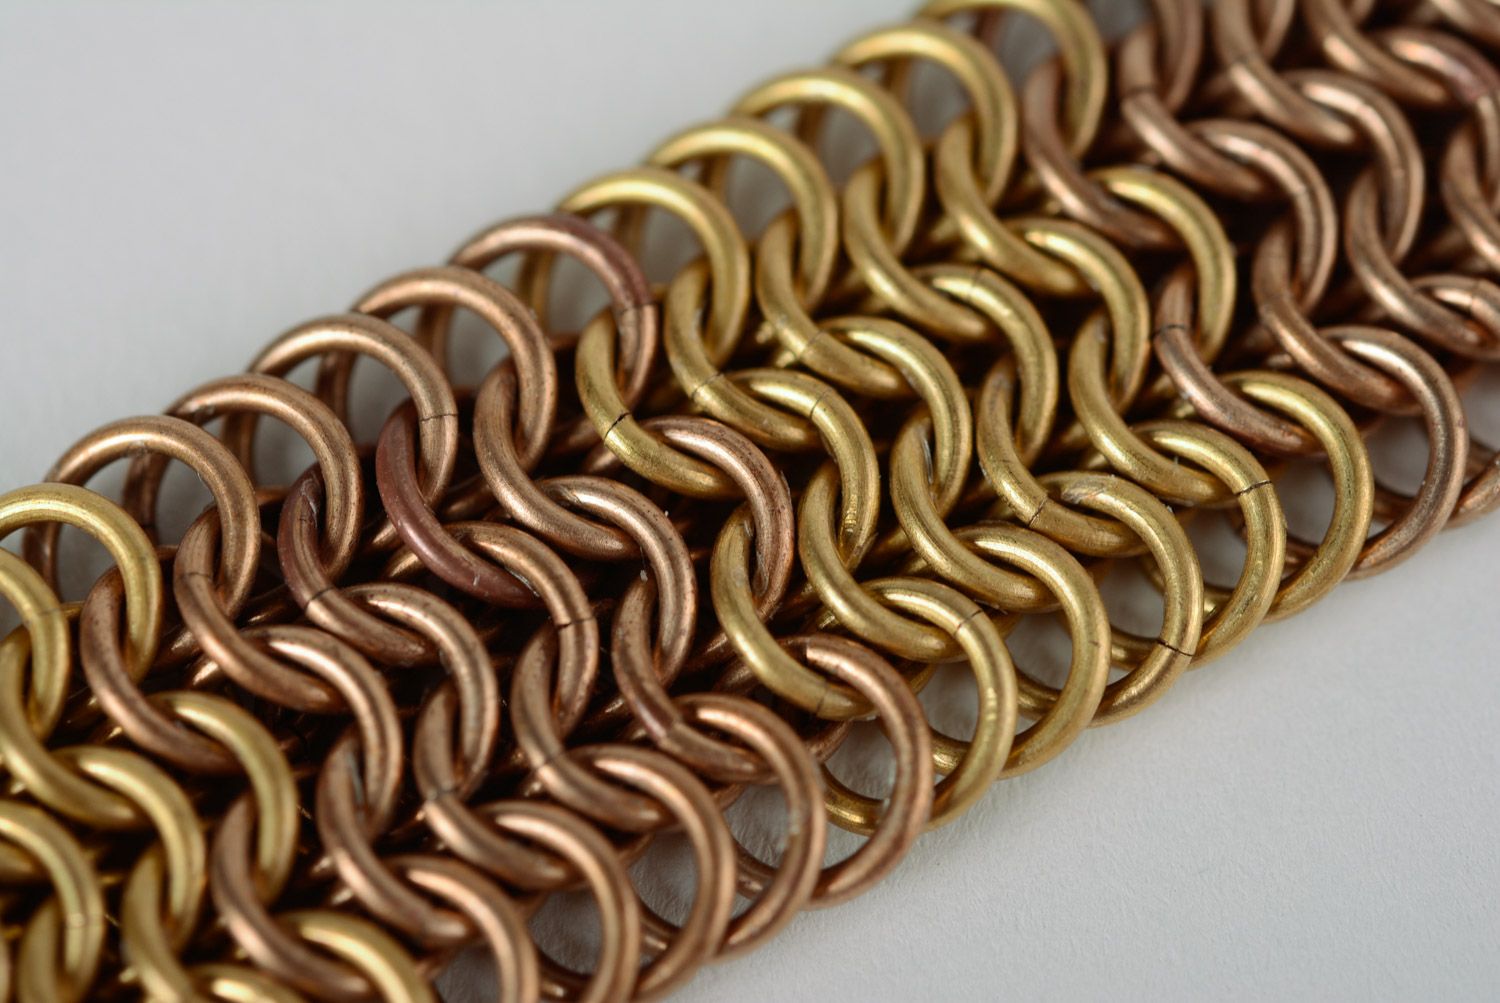 Unisex handmade wide chainmaille bracelet created of bronze and brass photo 4